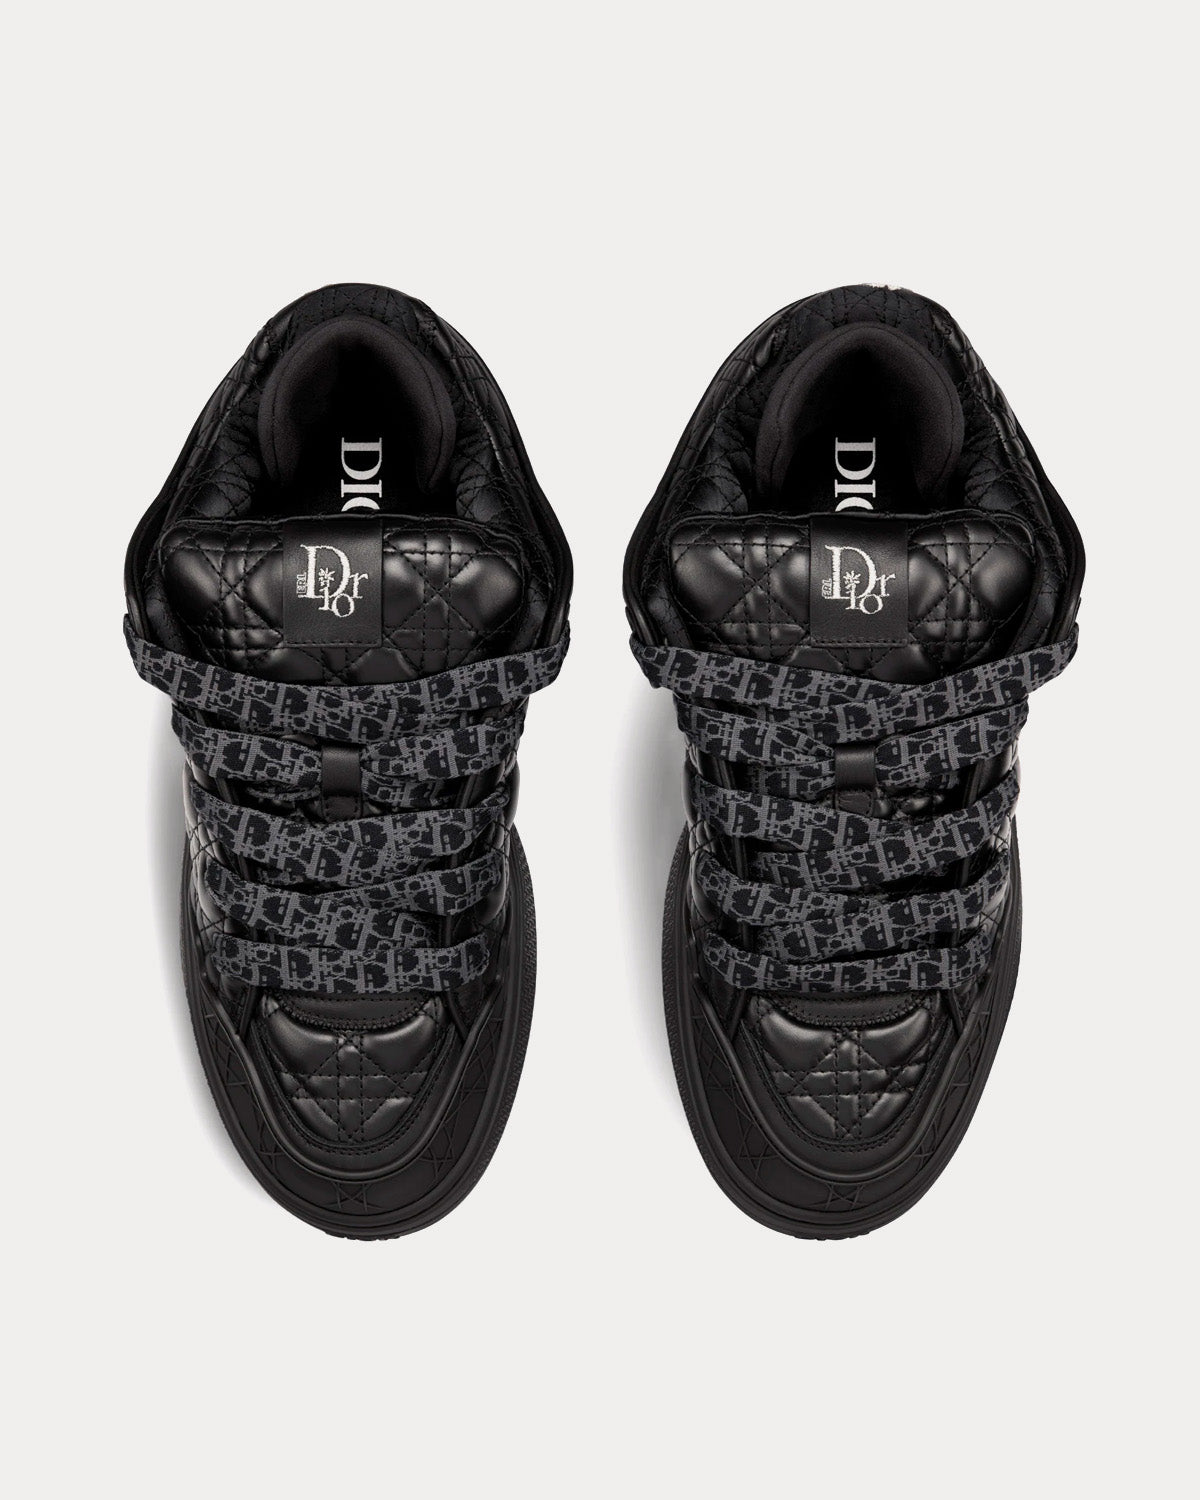 Dior x ERL - B9S Skater Limited And Numbered Edition Black Quilted Cannage Calfskin Low Top Sneakers